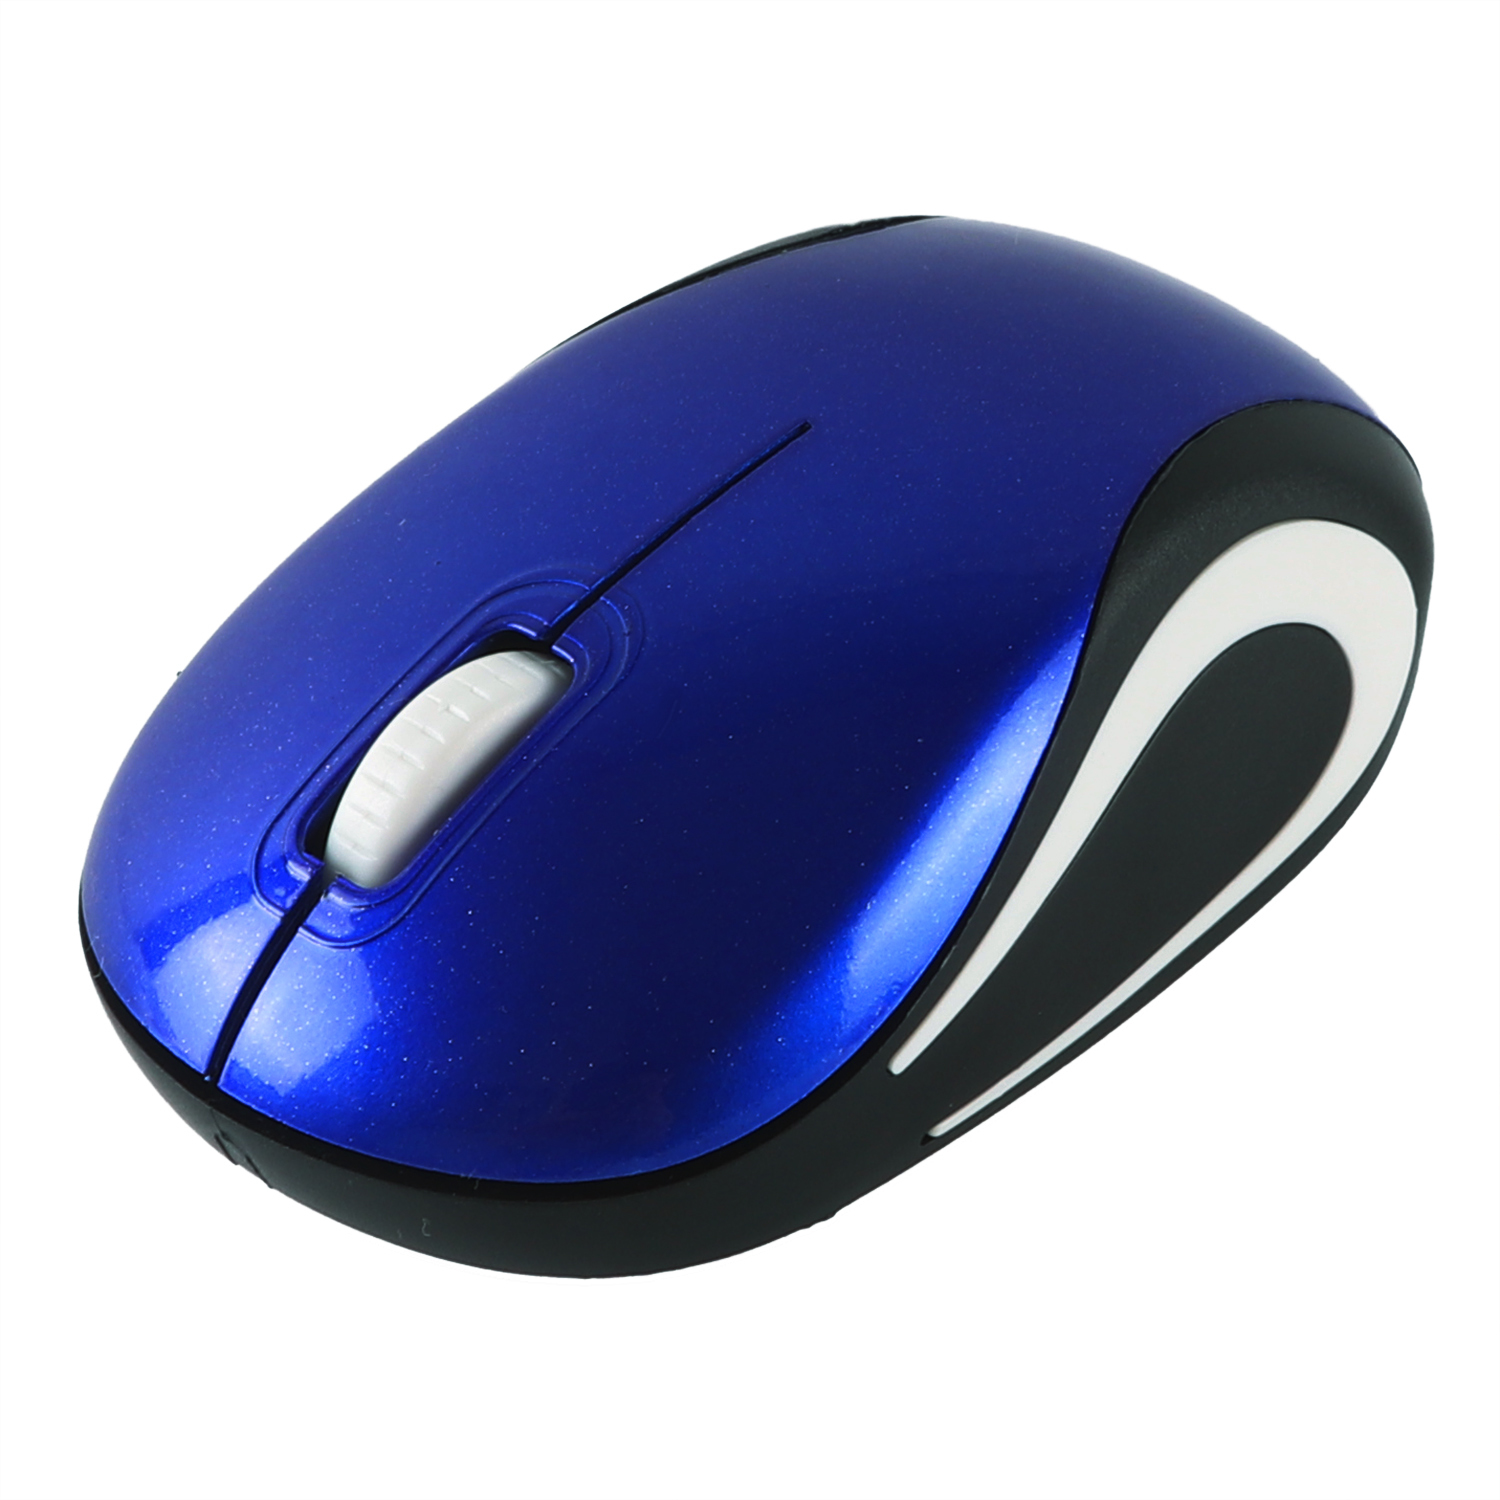 Mini-Wireless-mouse-for-Computer-2-4Ghz-Gaming-Small-Mause-1600-DPI-Optical-USB-Ergonomic-USB (8)